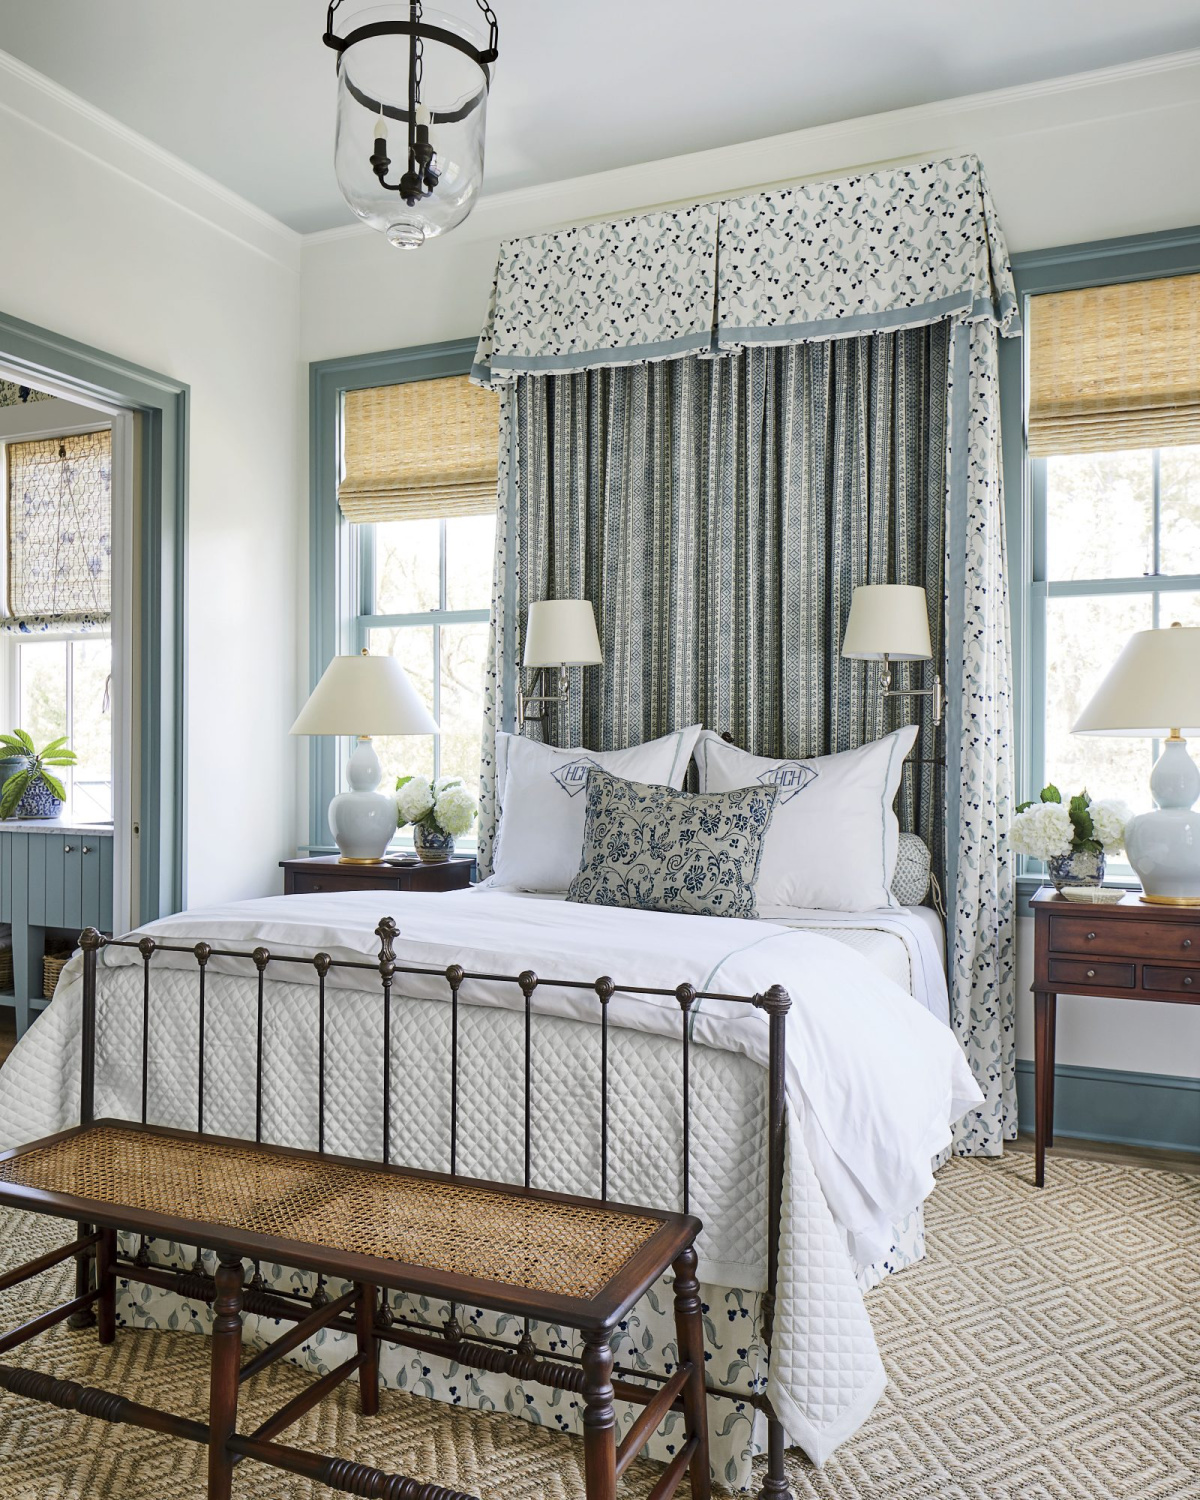 Dusty blue bedroom with charming fabric canopy and elegant design - Southern Living. #bluebedrooms #interiordesign #dustyblue